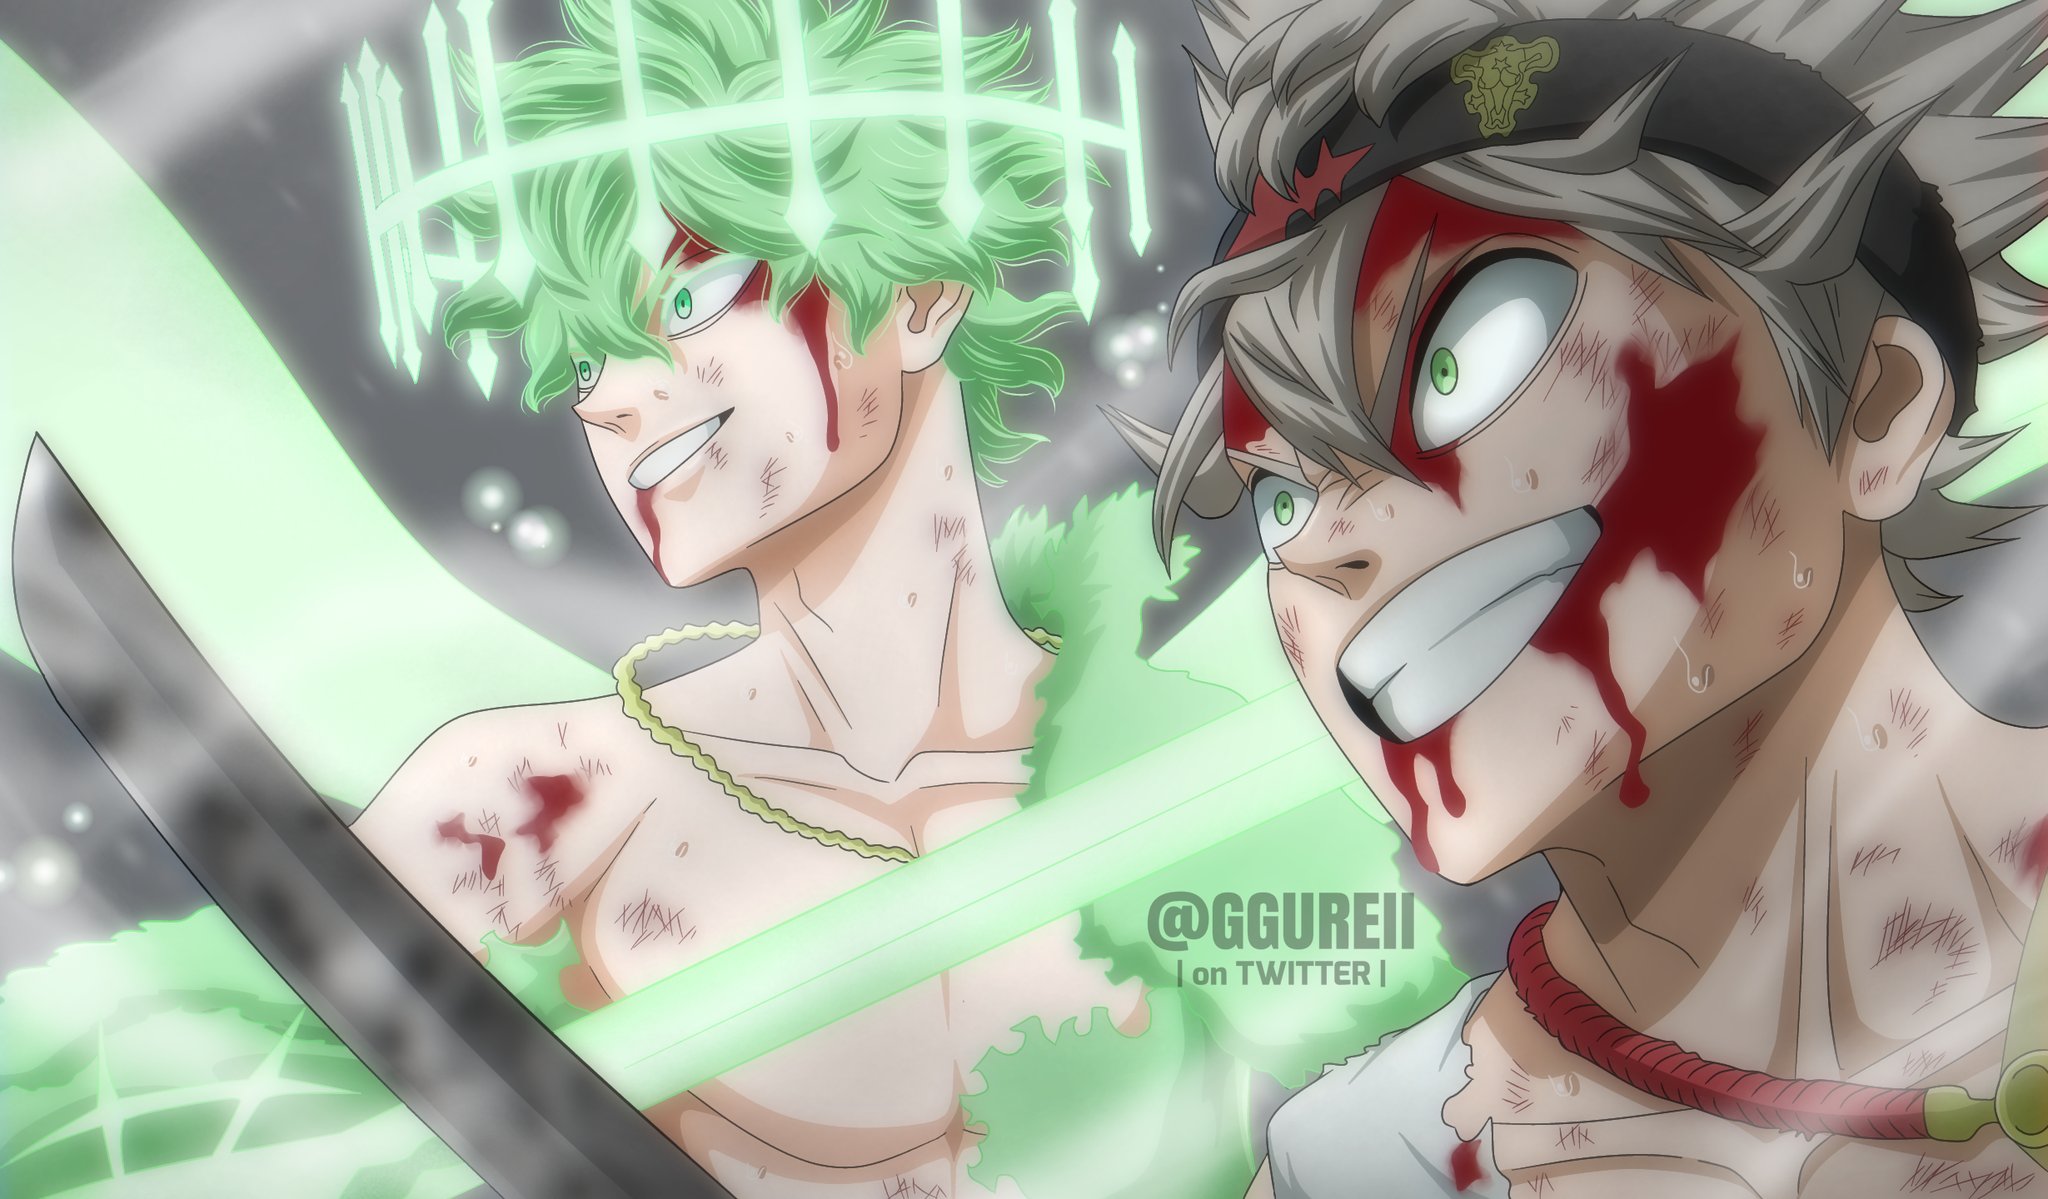 Raine The Duo Is Back Asta Yuno Black Clover 324 ブラッククローバー spoilers Mangacoloring T Co 5ubwqyqwjh Twitter